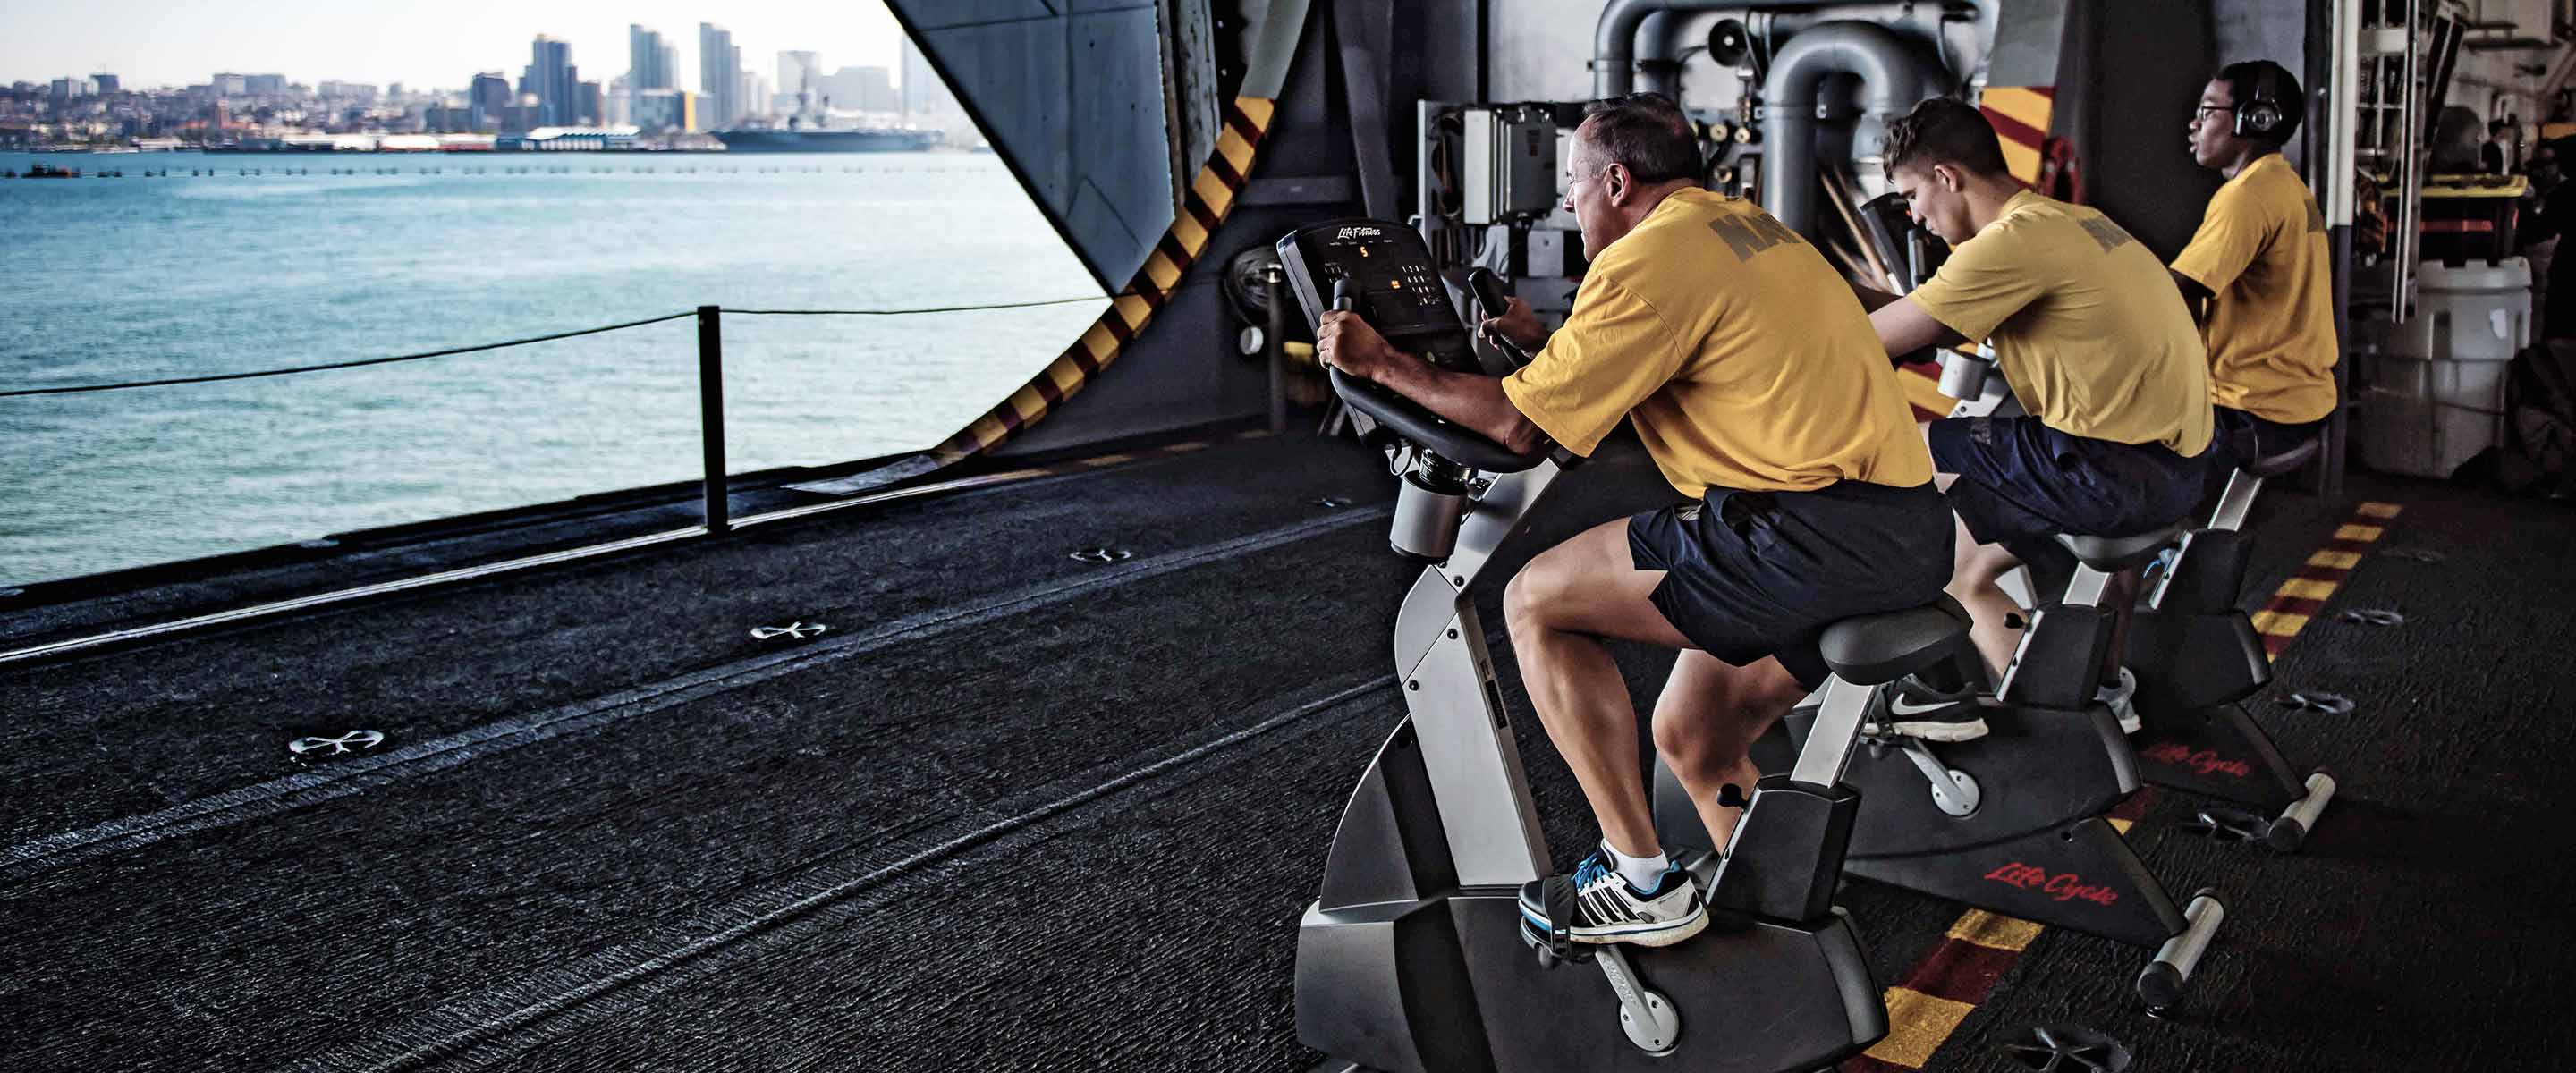 Navy Sailors condition with stationary bikes aboard a ship